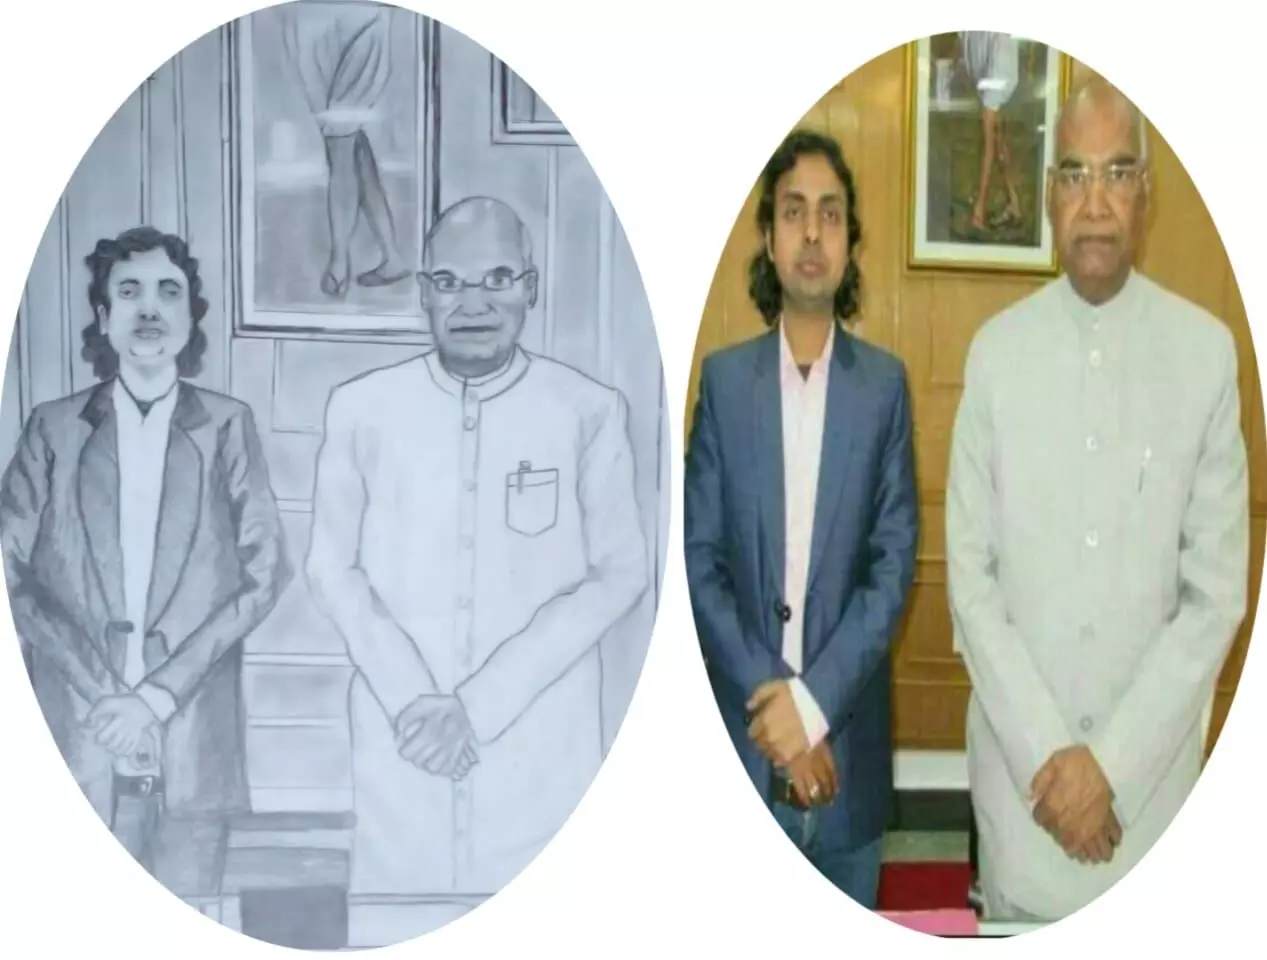 Talent needs no introduction: Aditya makes wonderful sketch of mathematician RK Srivastava with former President